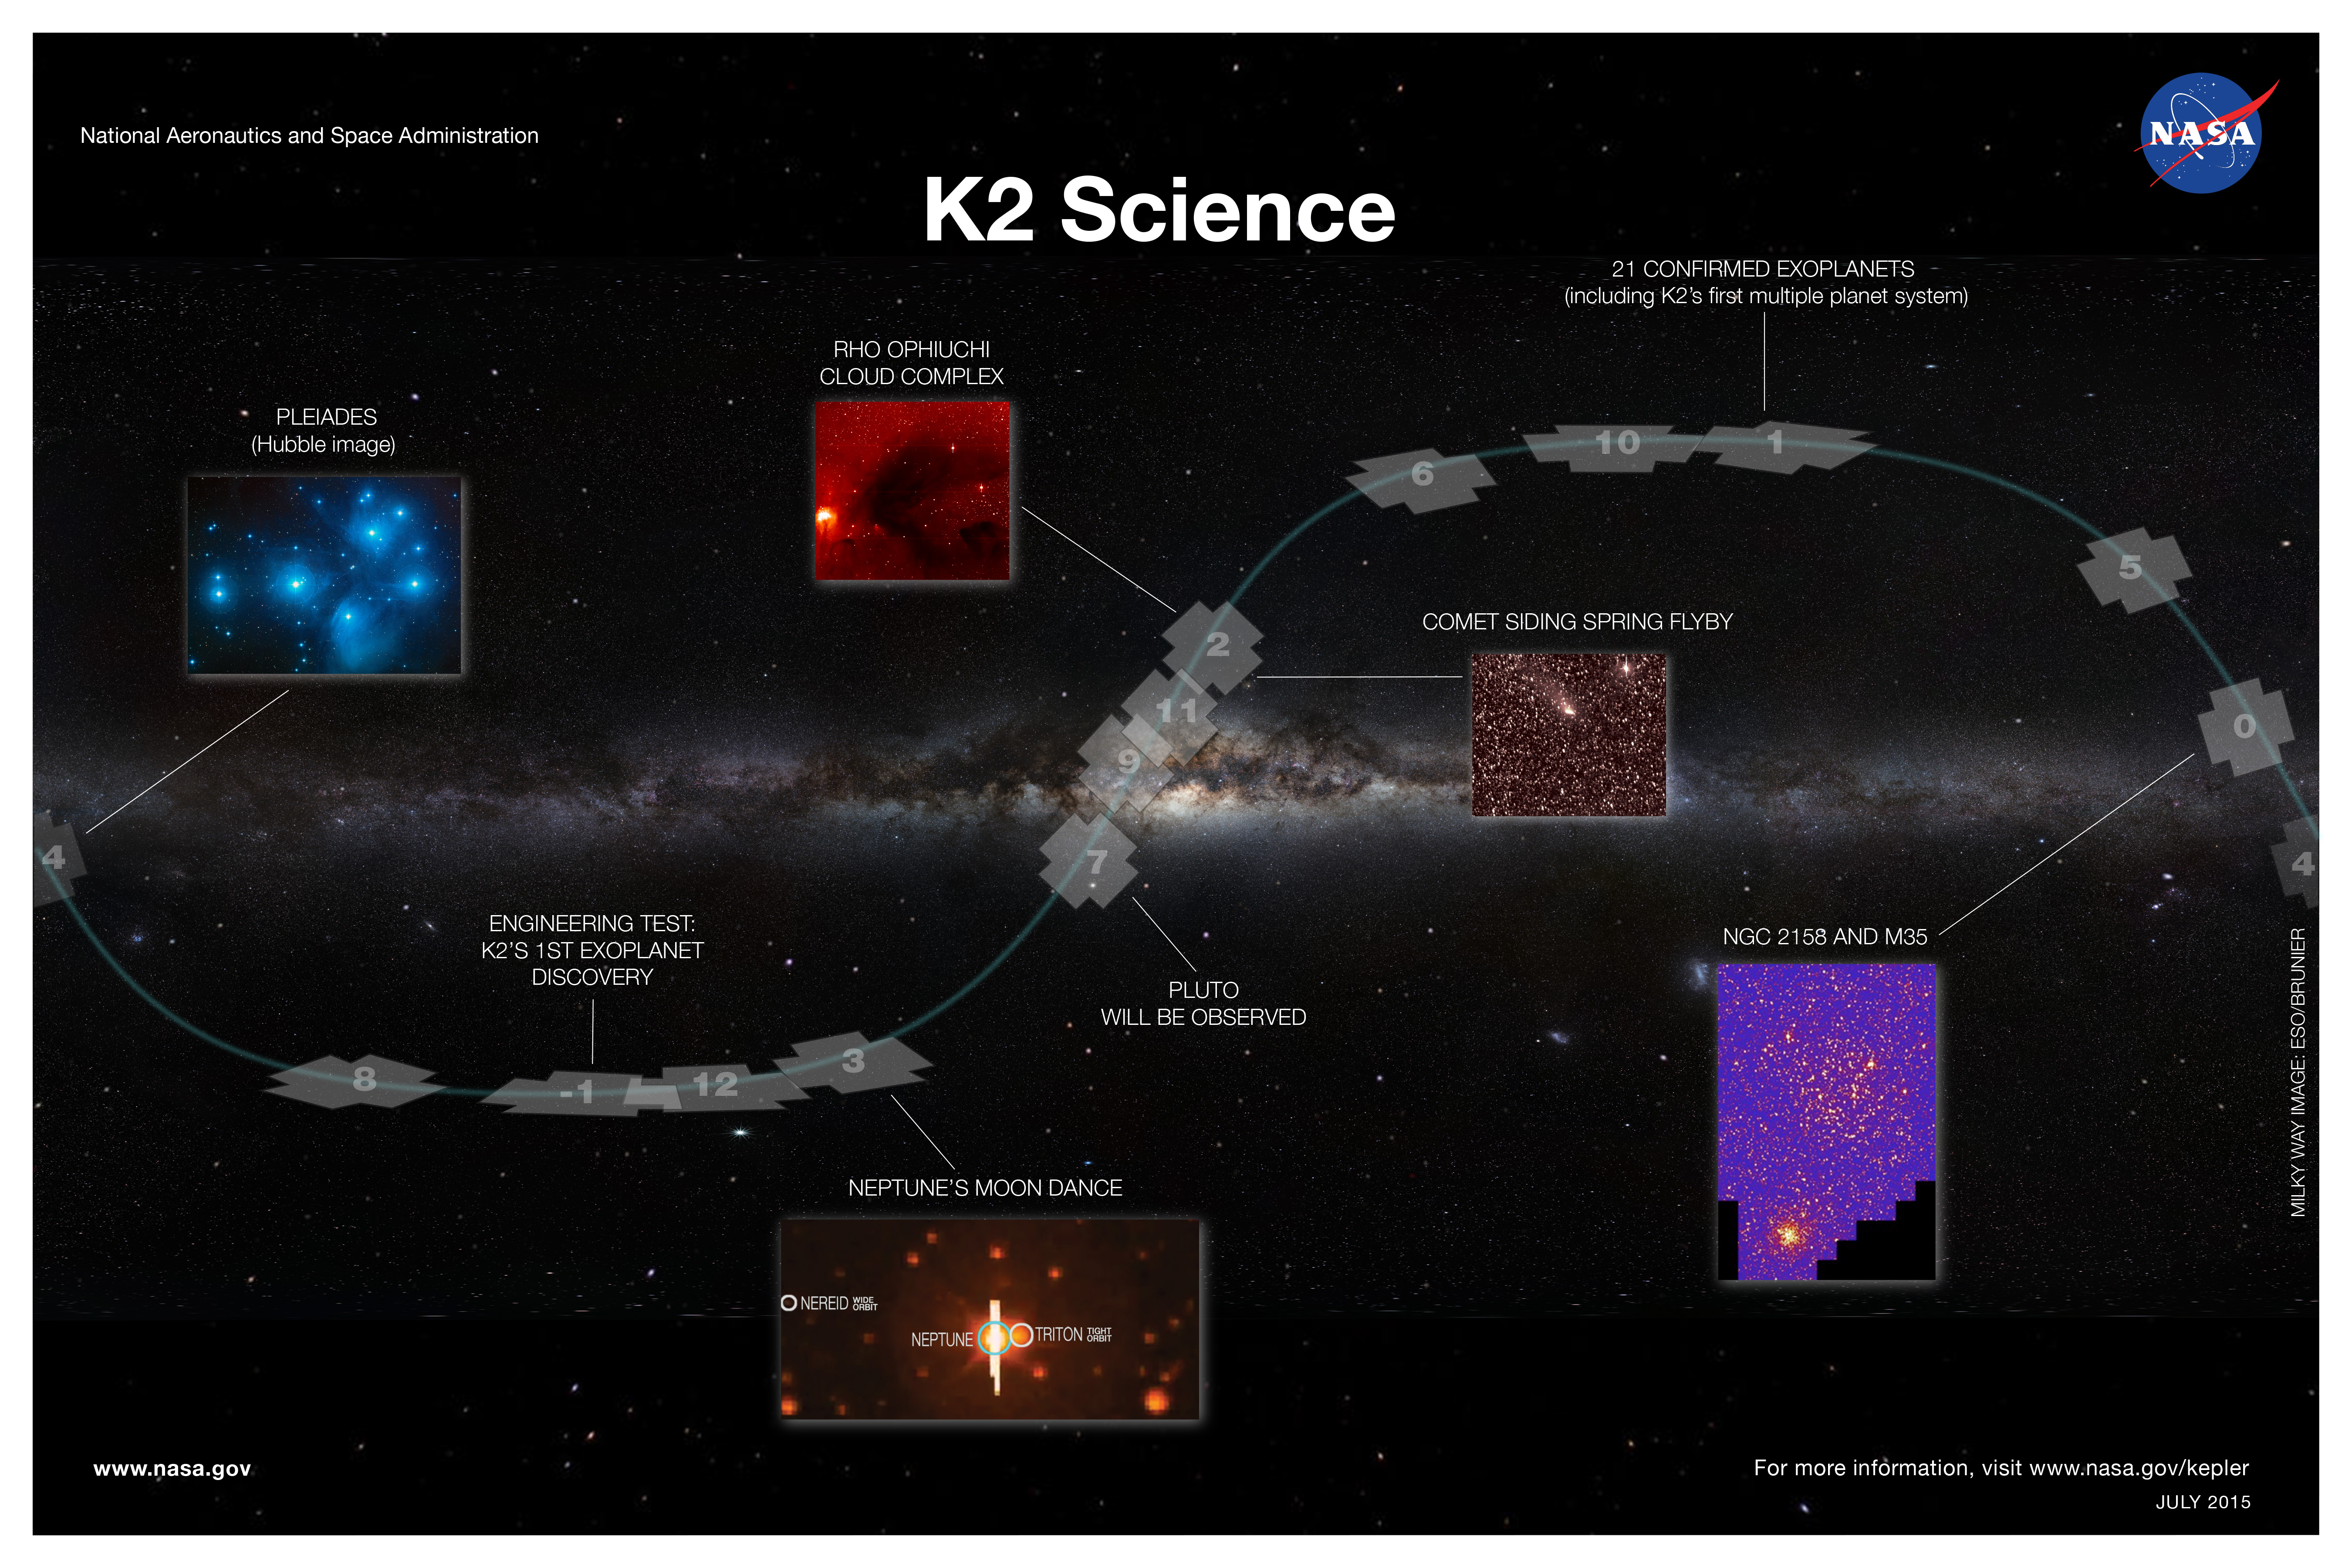 K2 Science Overview